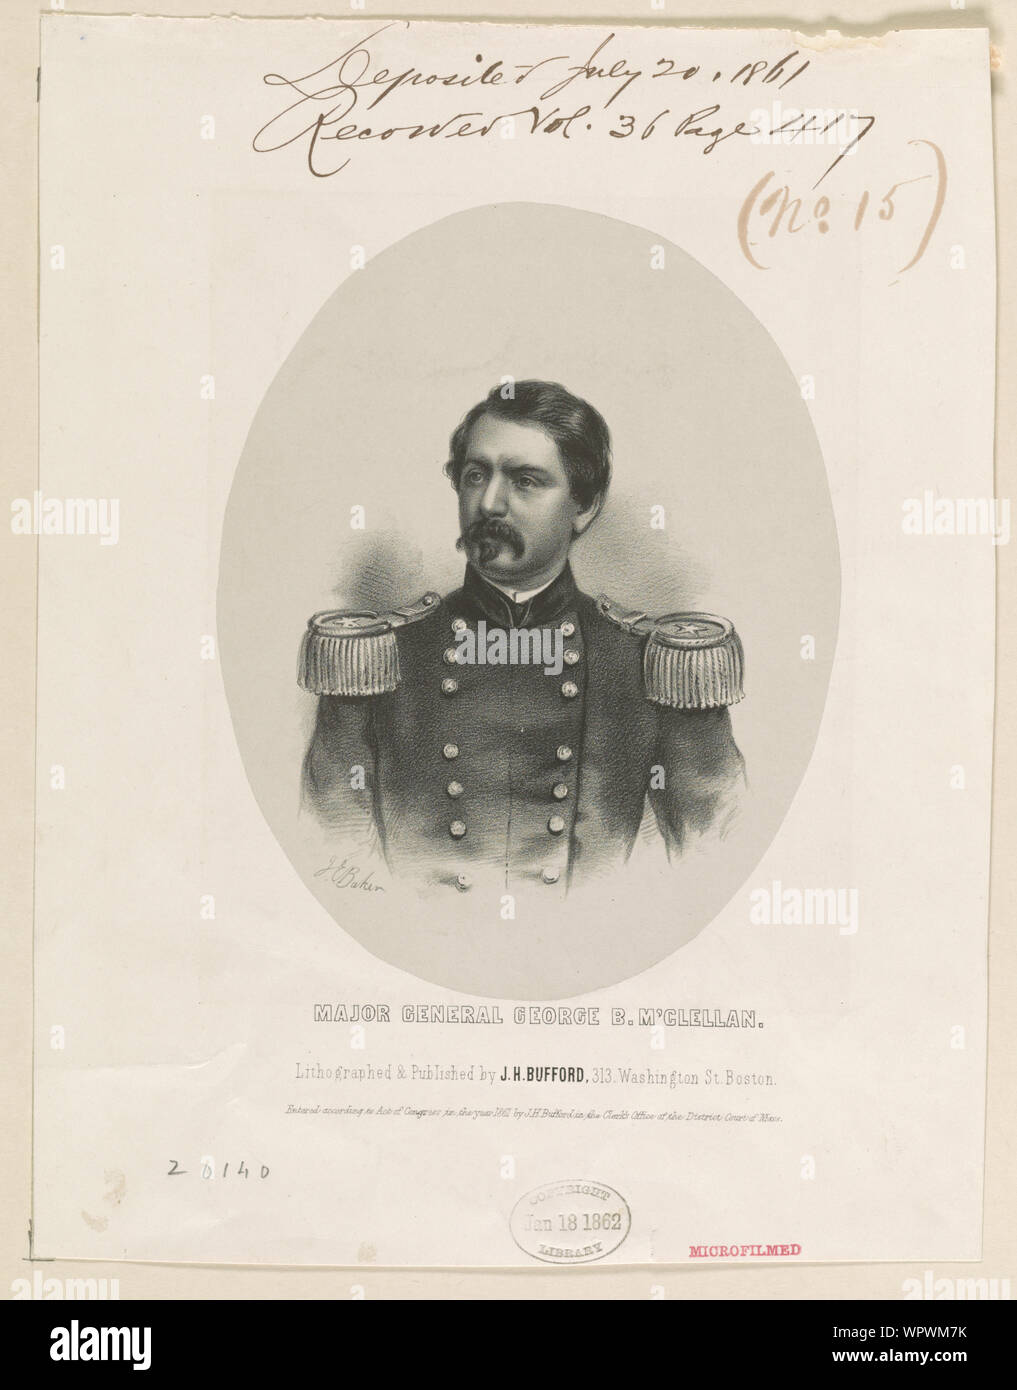 Major General George B. M'Clellan / J.E. Baker ; lithographed & published by J.H. Bufford. Stock Photo